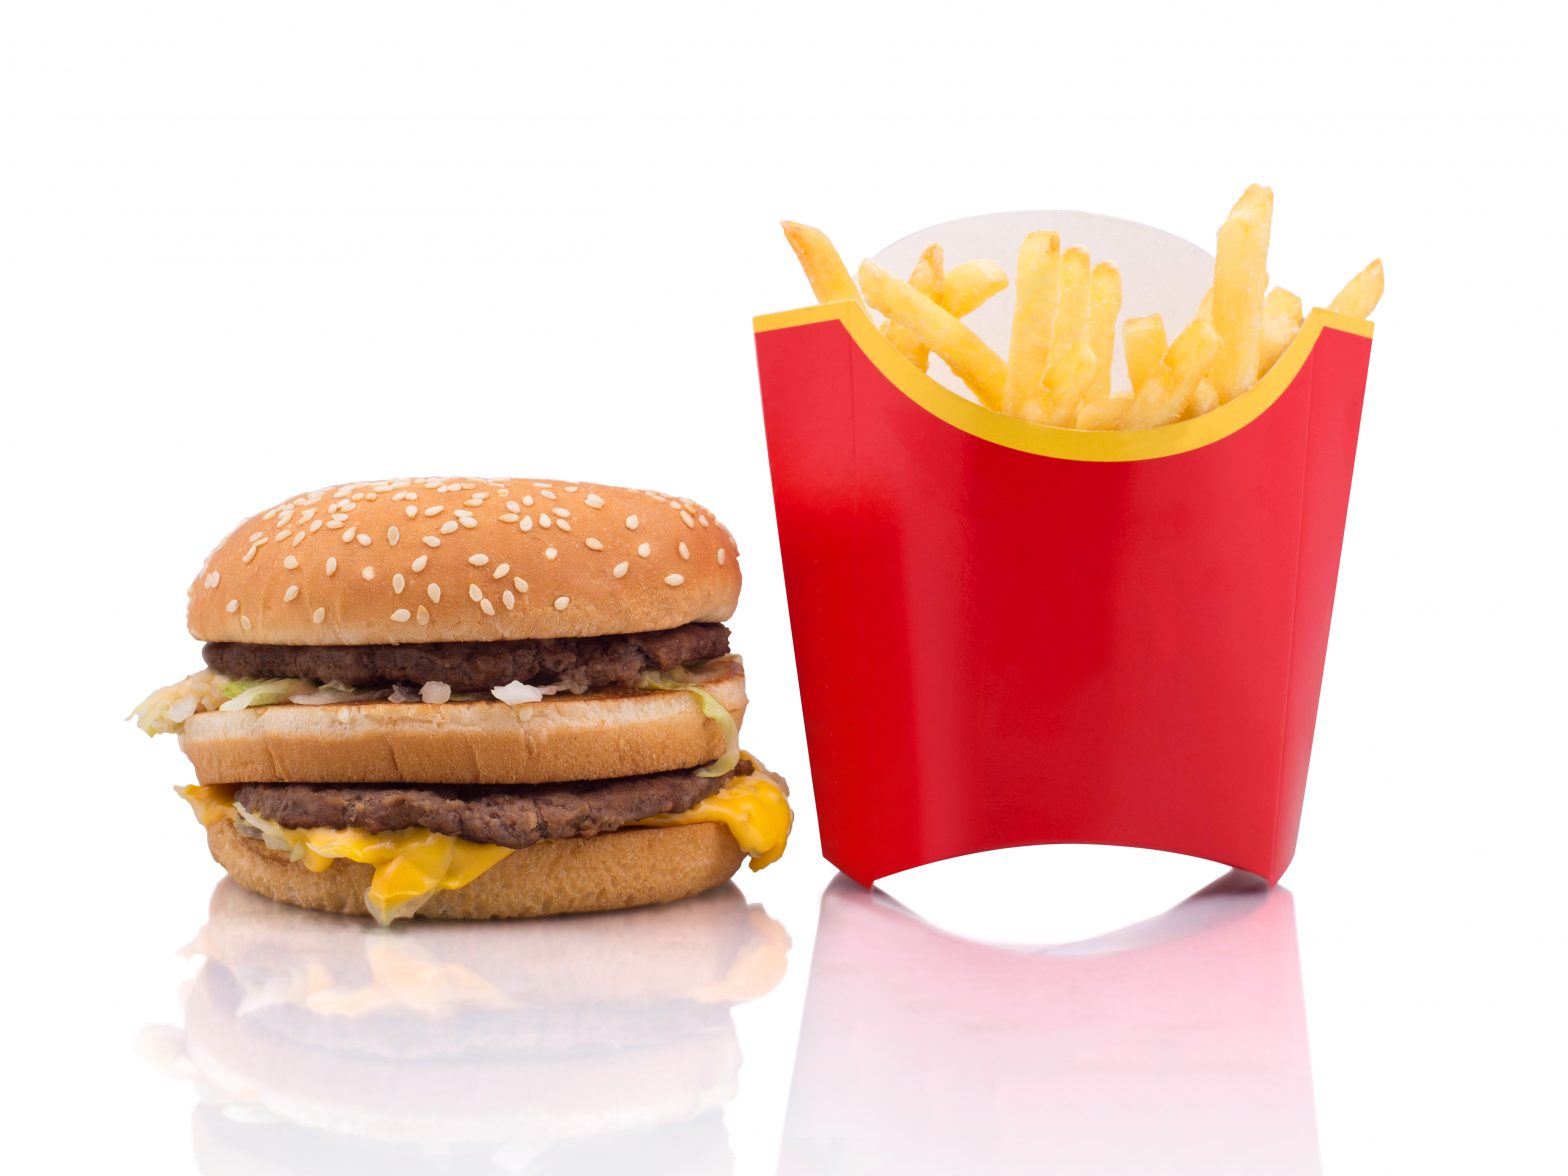 Hamburger and French fries on white background